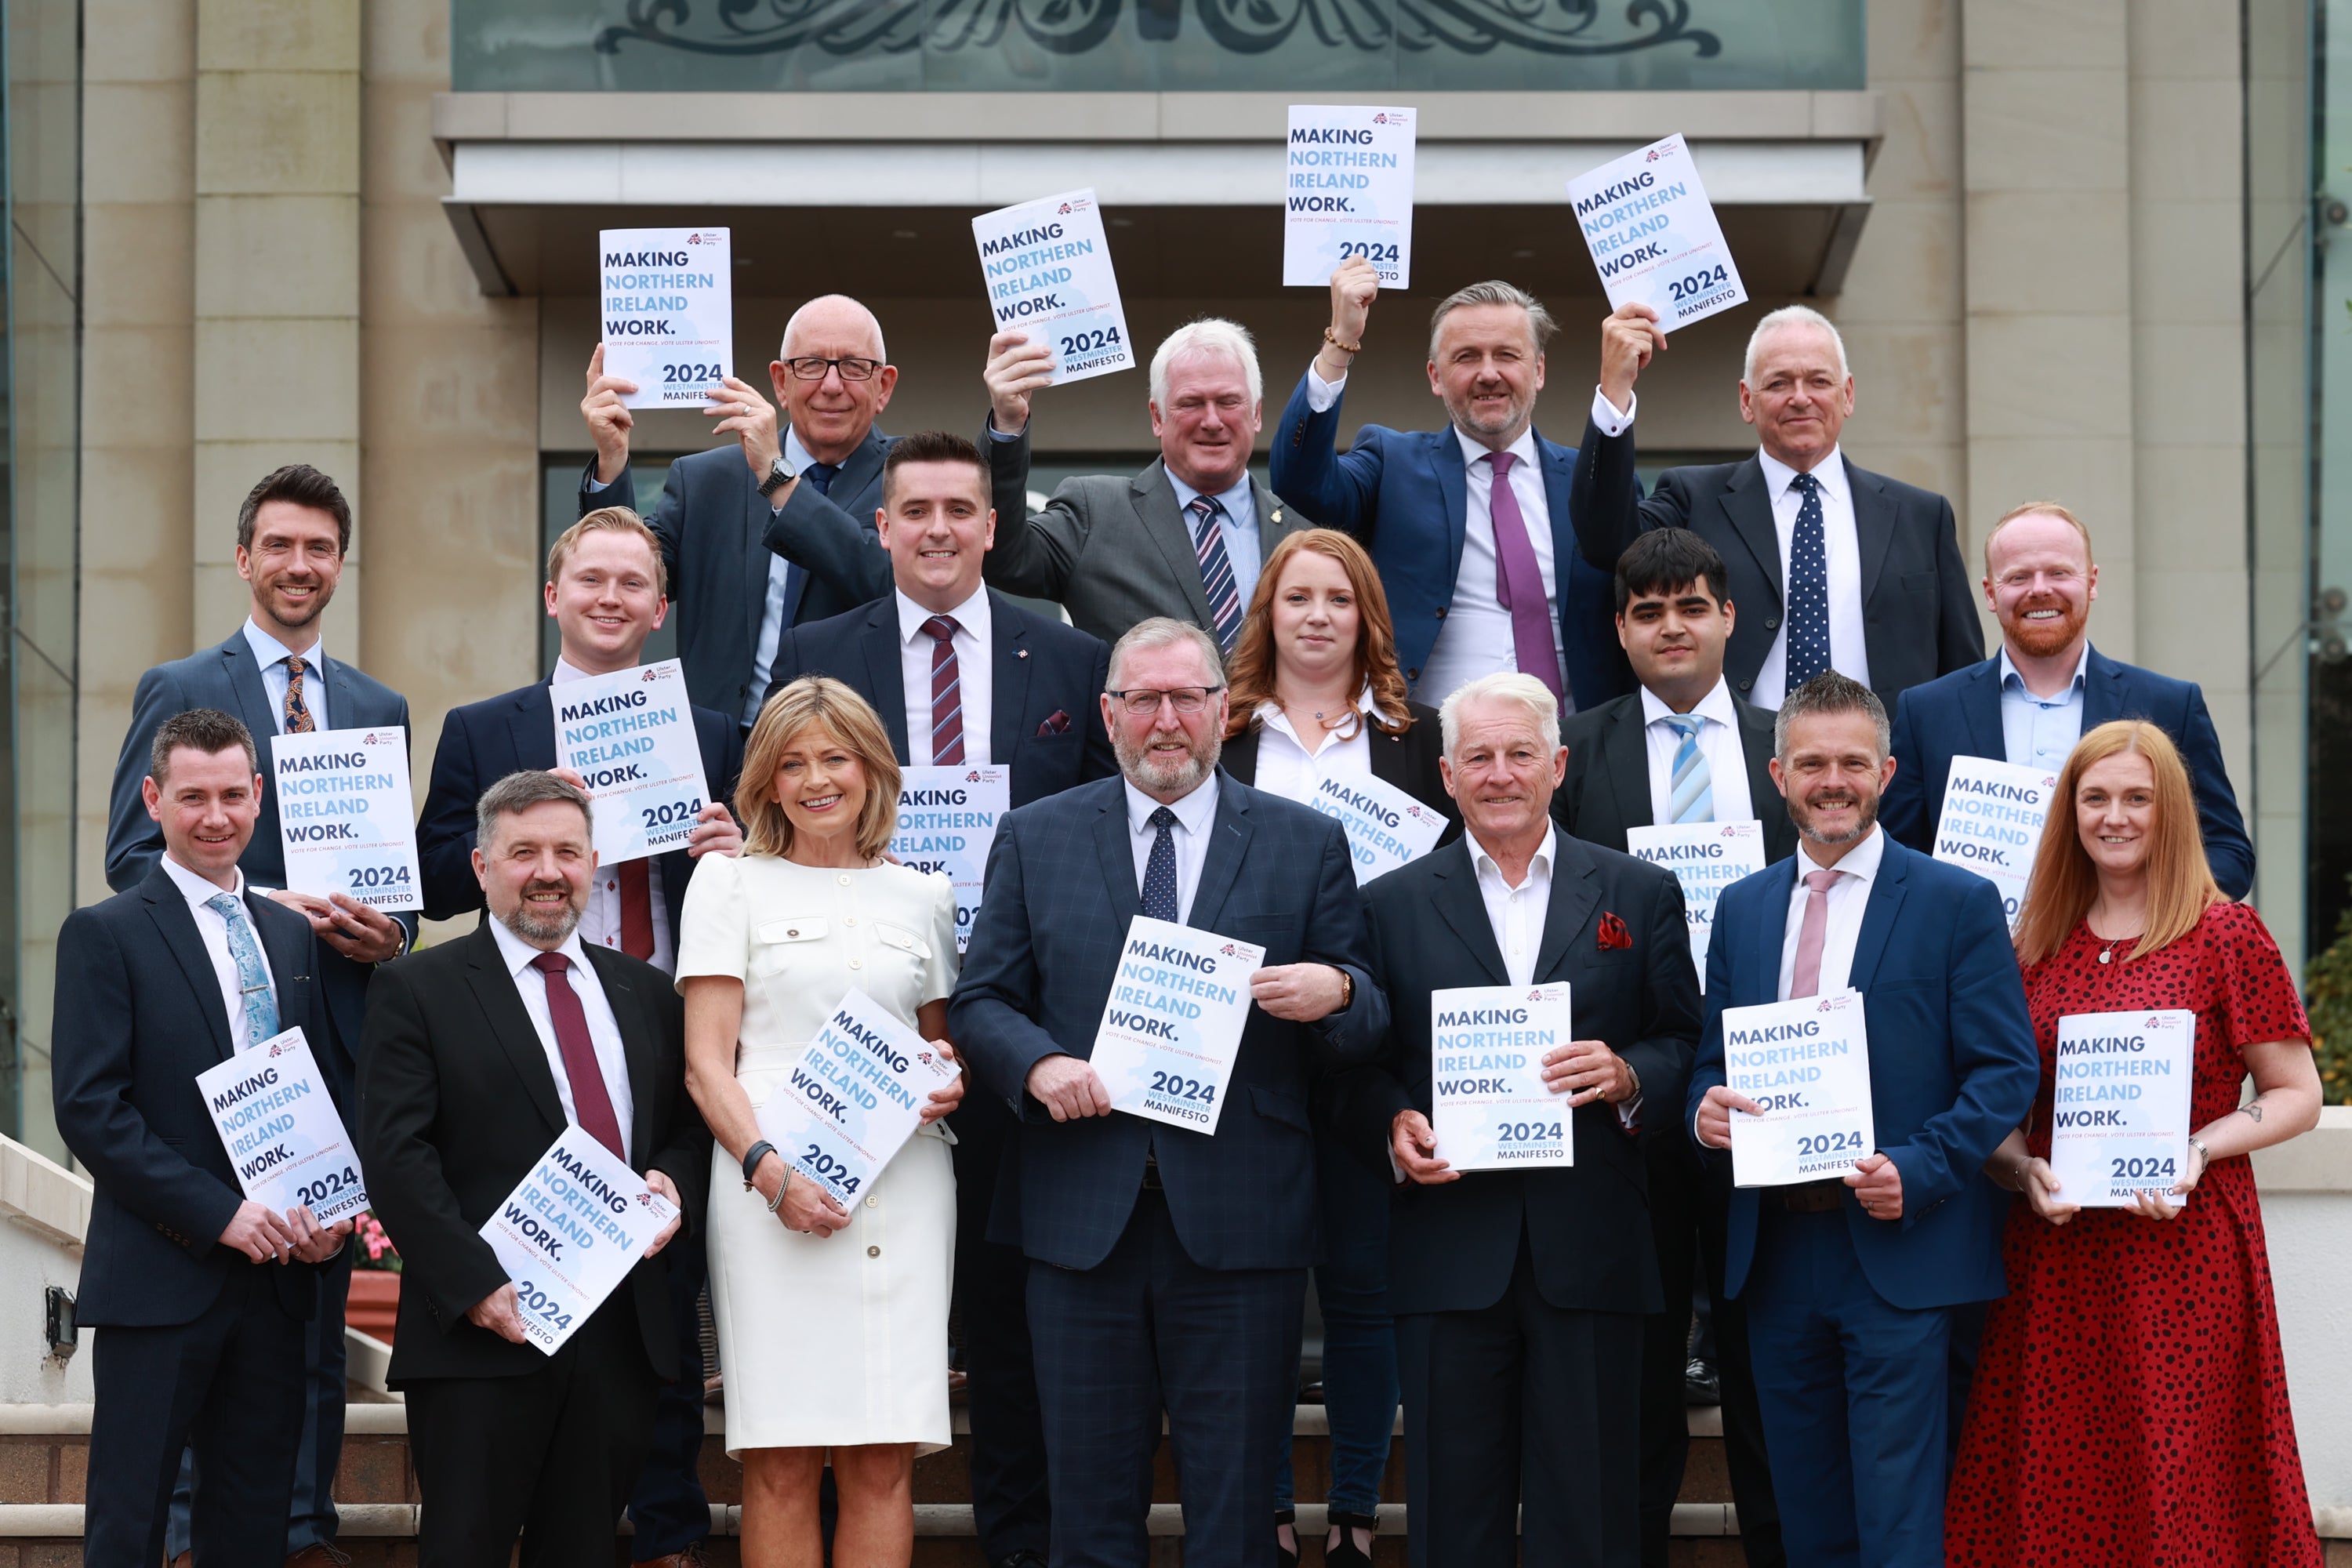 Doug Beattie (front centre), leader of the Ulster Unionist Party (UUP) stands with party candidates following the party's manifesto launch at the Stormont Hotel in Belfast